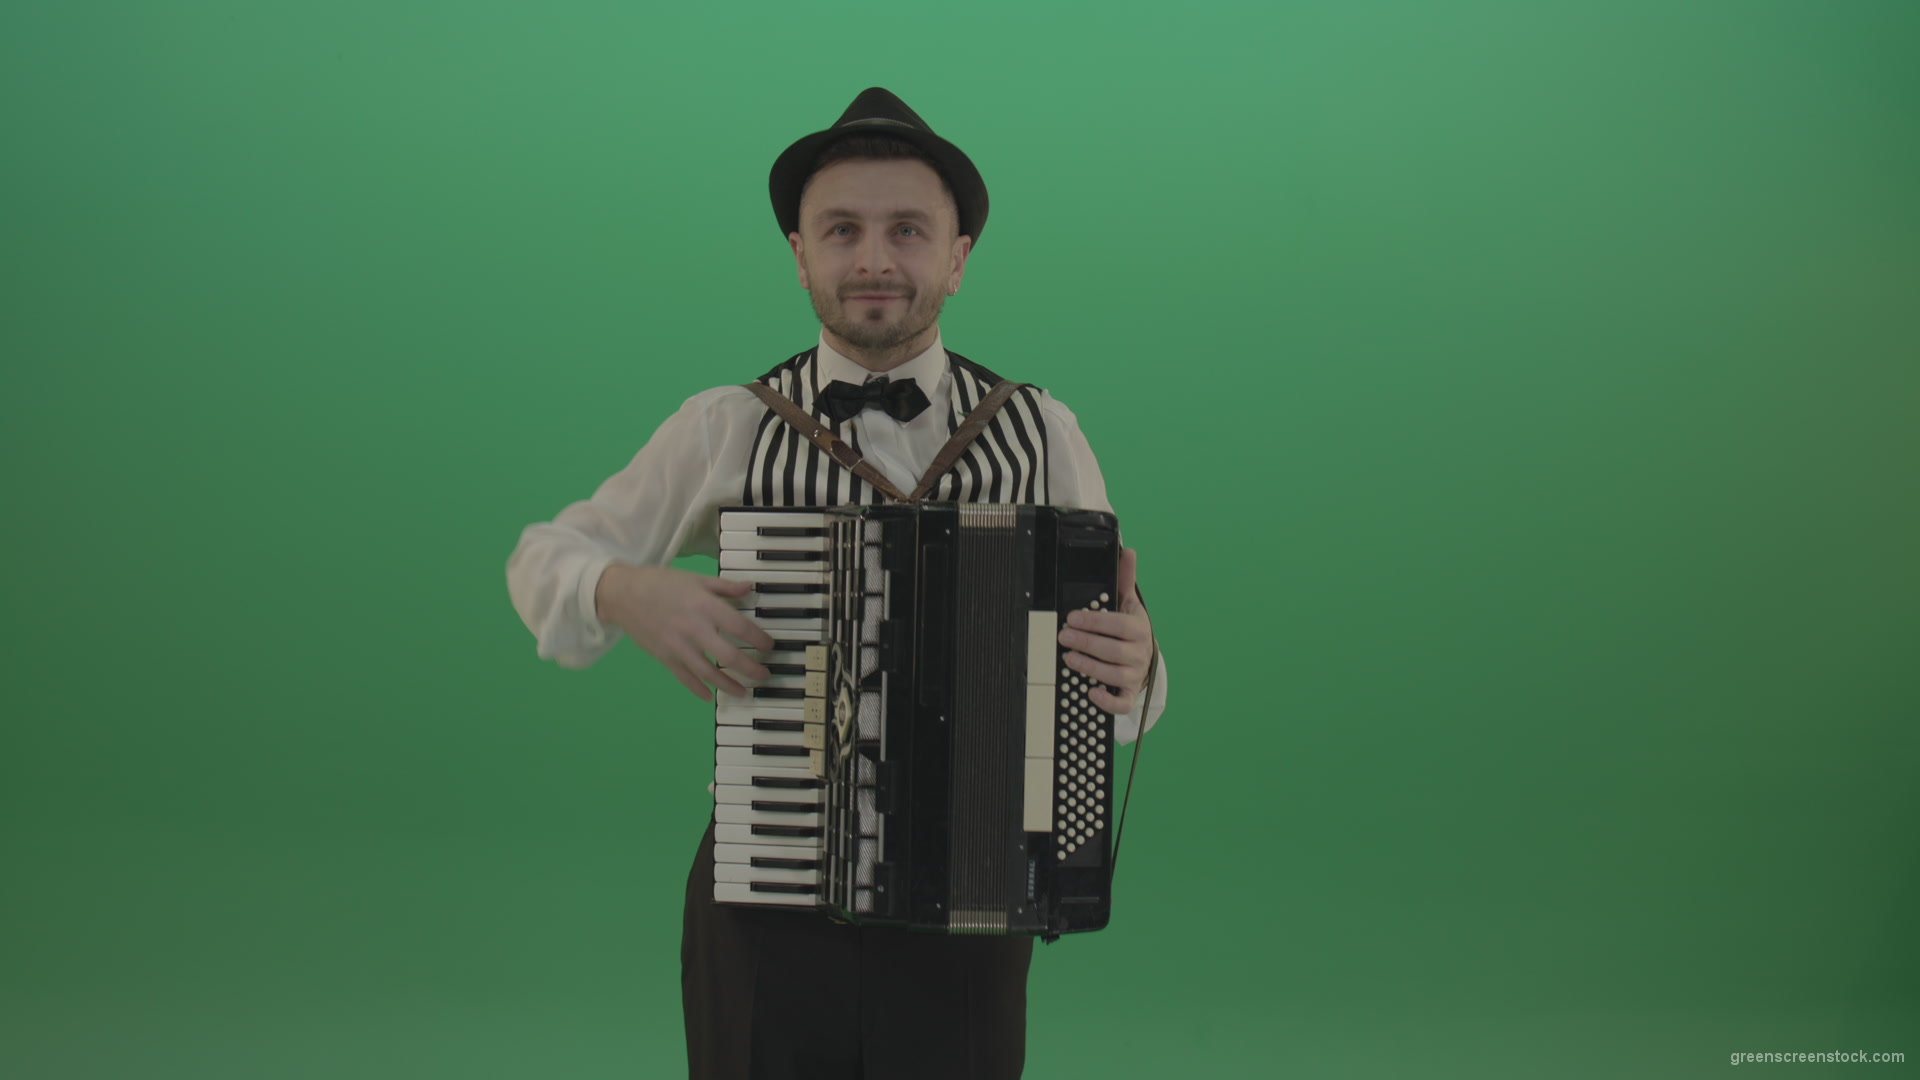 Virtuoso-player-man-with-Accordion-isolated-on-green-screen-in-front-view-1_001 Green Screen Stock